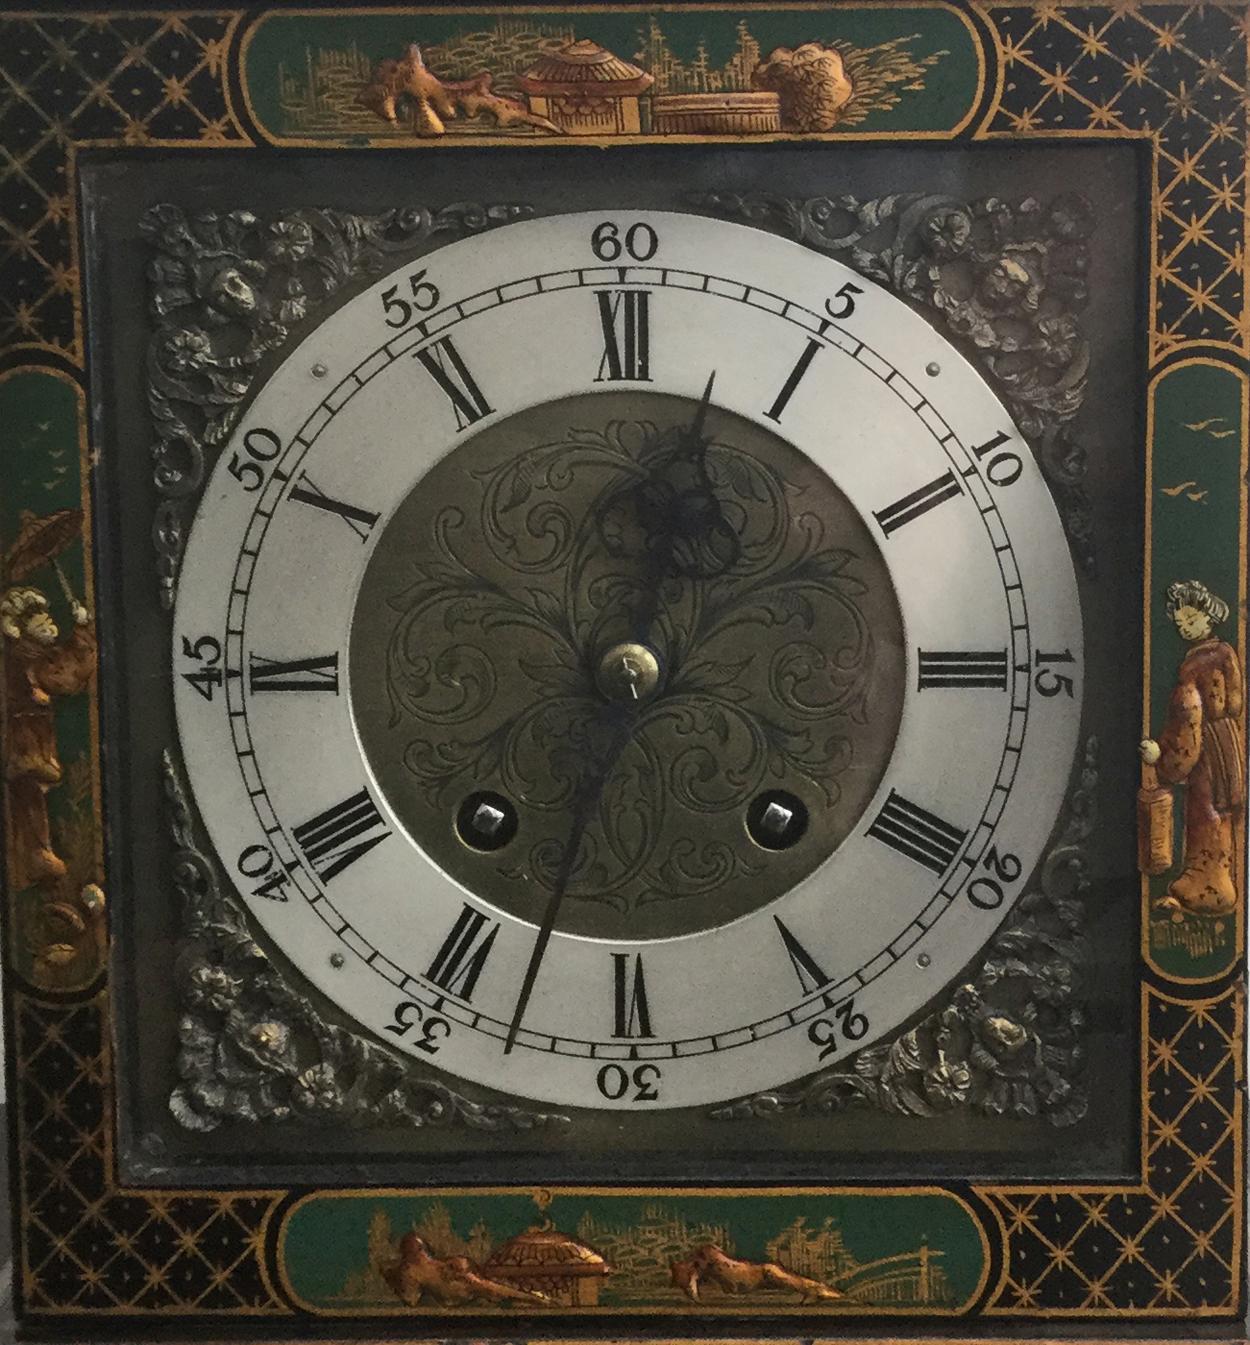 An attractive green chinoiserie Georgian style mantel clock, circa 1920, the case profusely decorated in relief with garden scenes, figures, pagodas and floral motifs, the top with brass handle, on brass bun feet.

The brass face with engraved